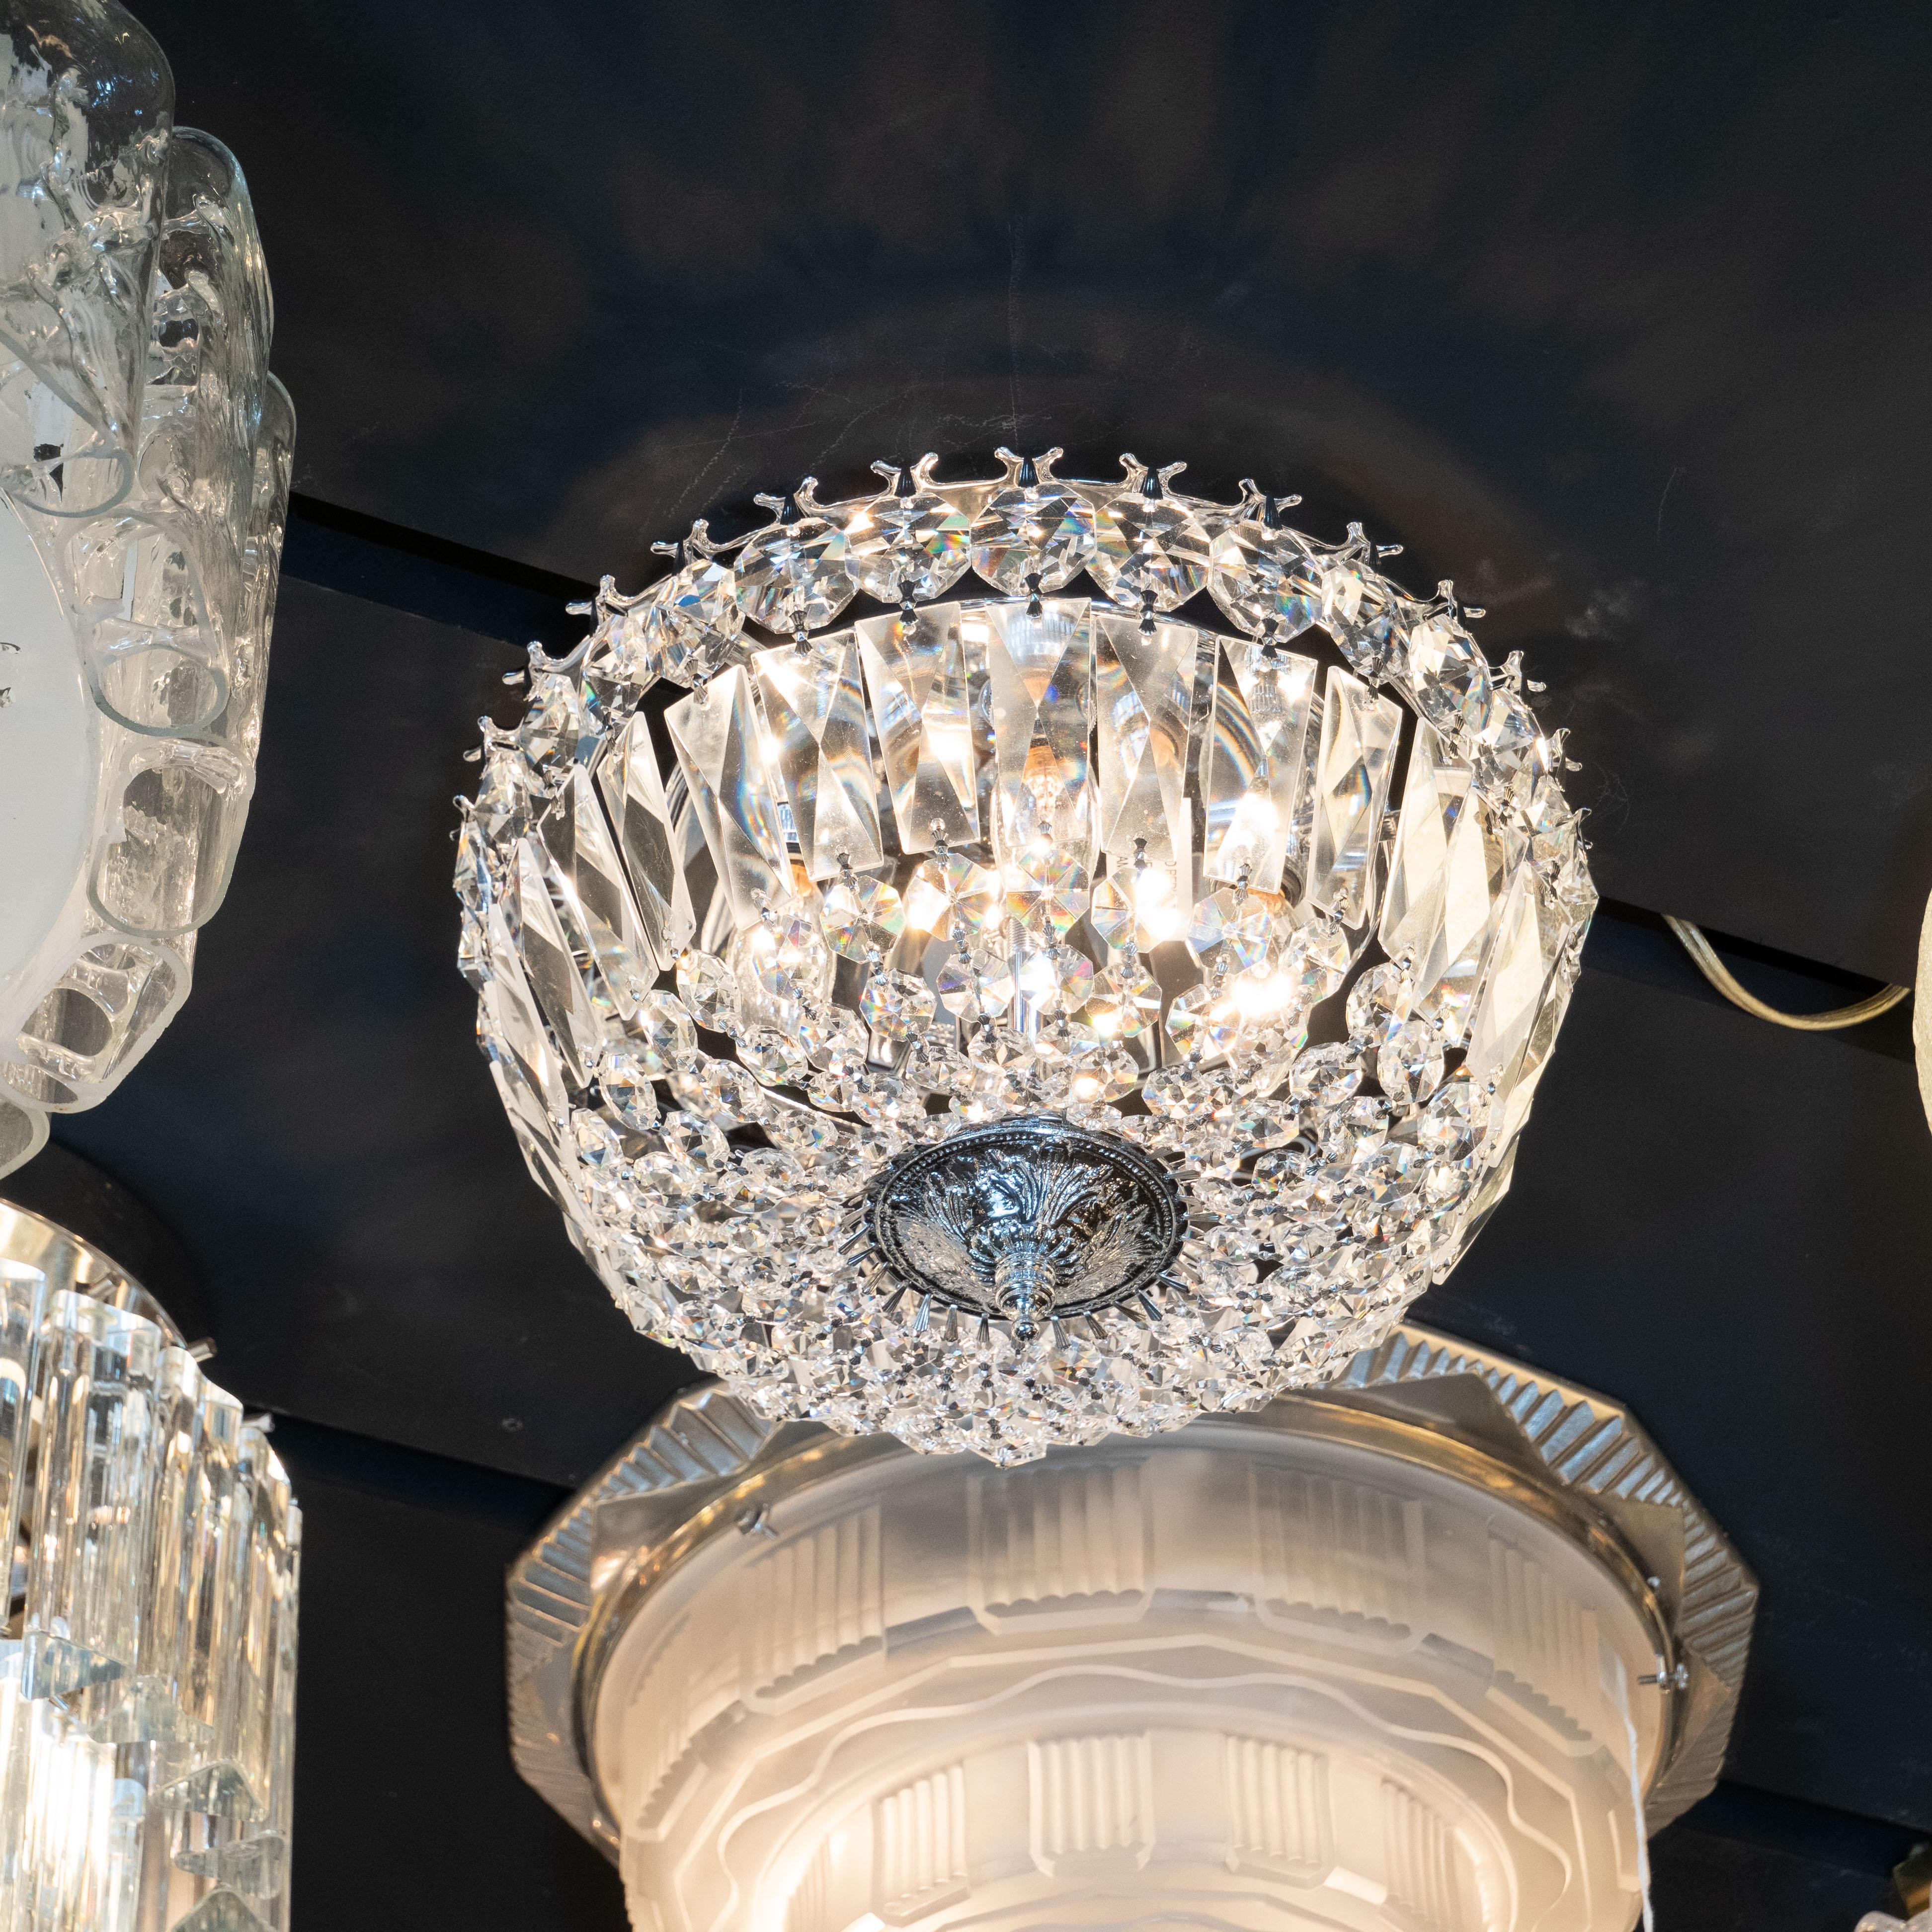 This elegant and glamorous Hollywood Art Deco flush mount chandelier was realized in the United States, circa 1945. It features an abundance of faceted crystal medallions- resembling finely cut and luminous diamonds- attached to a silvered frame.